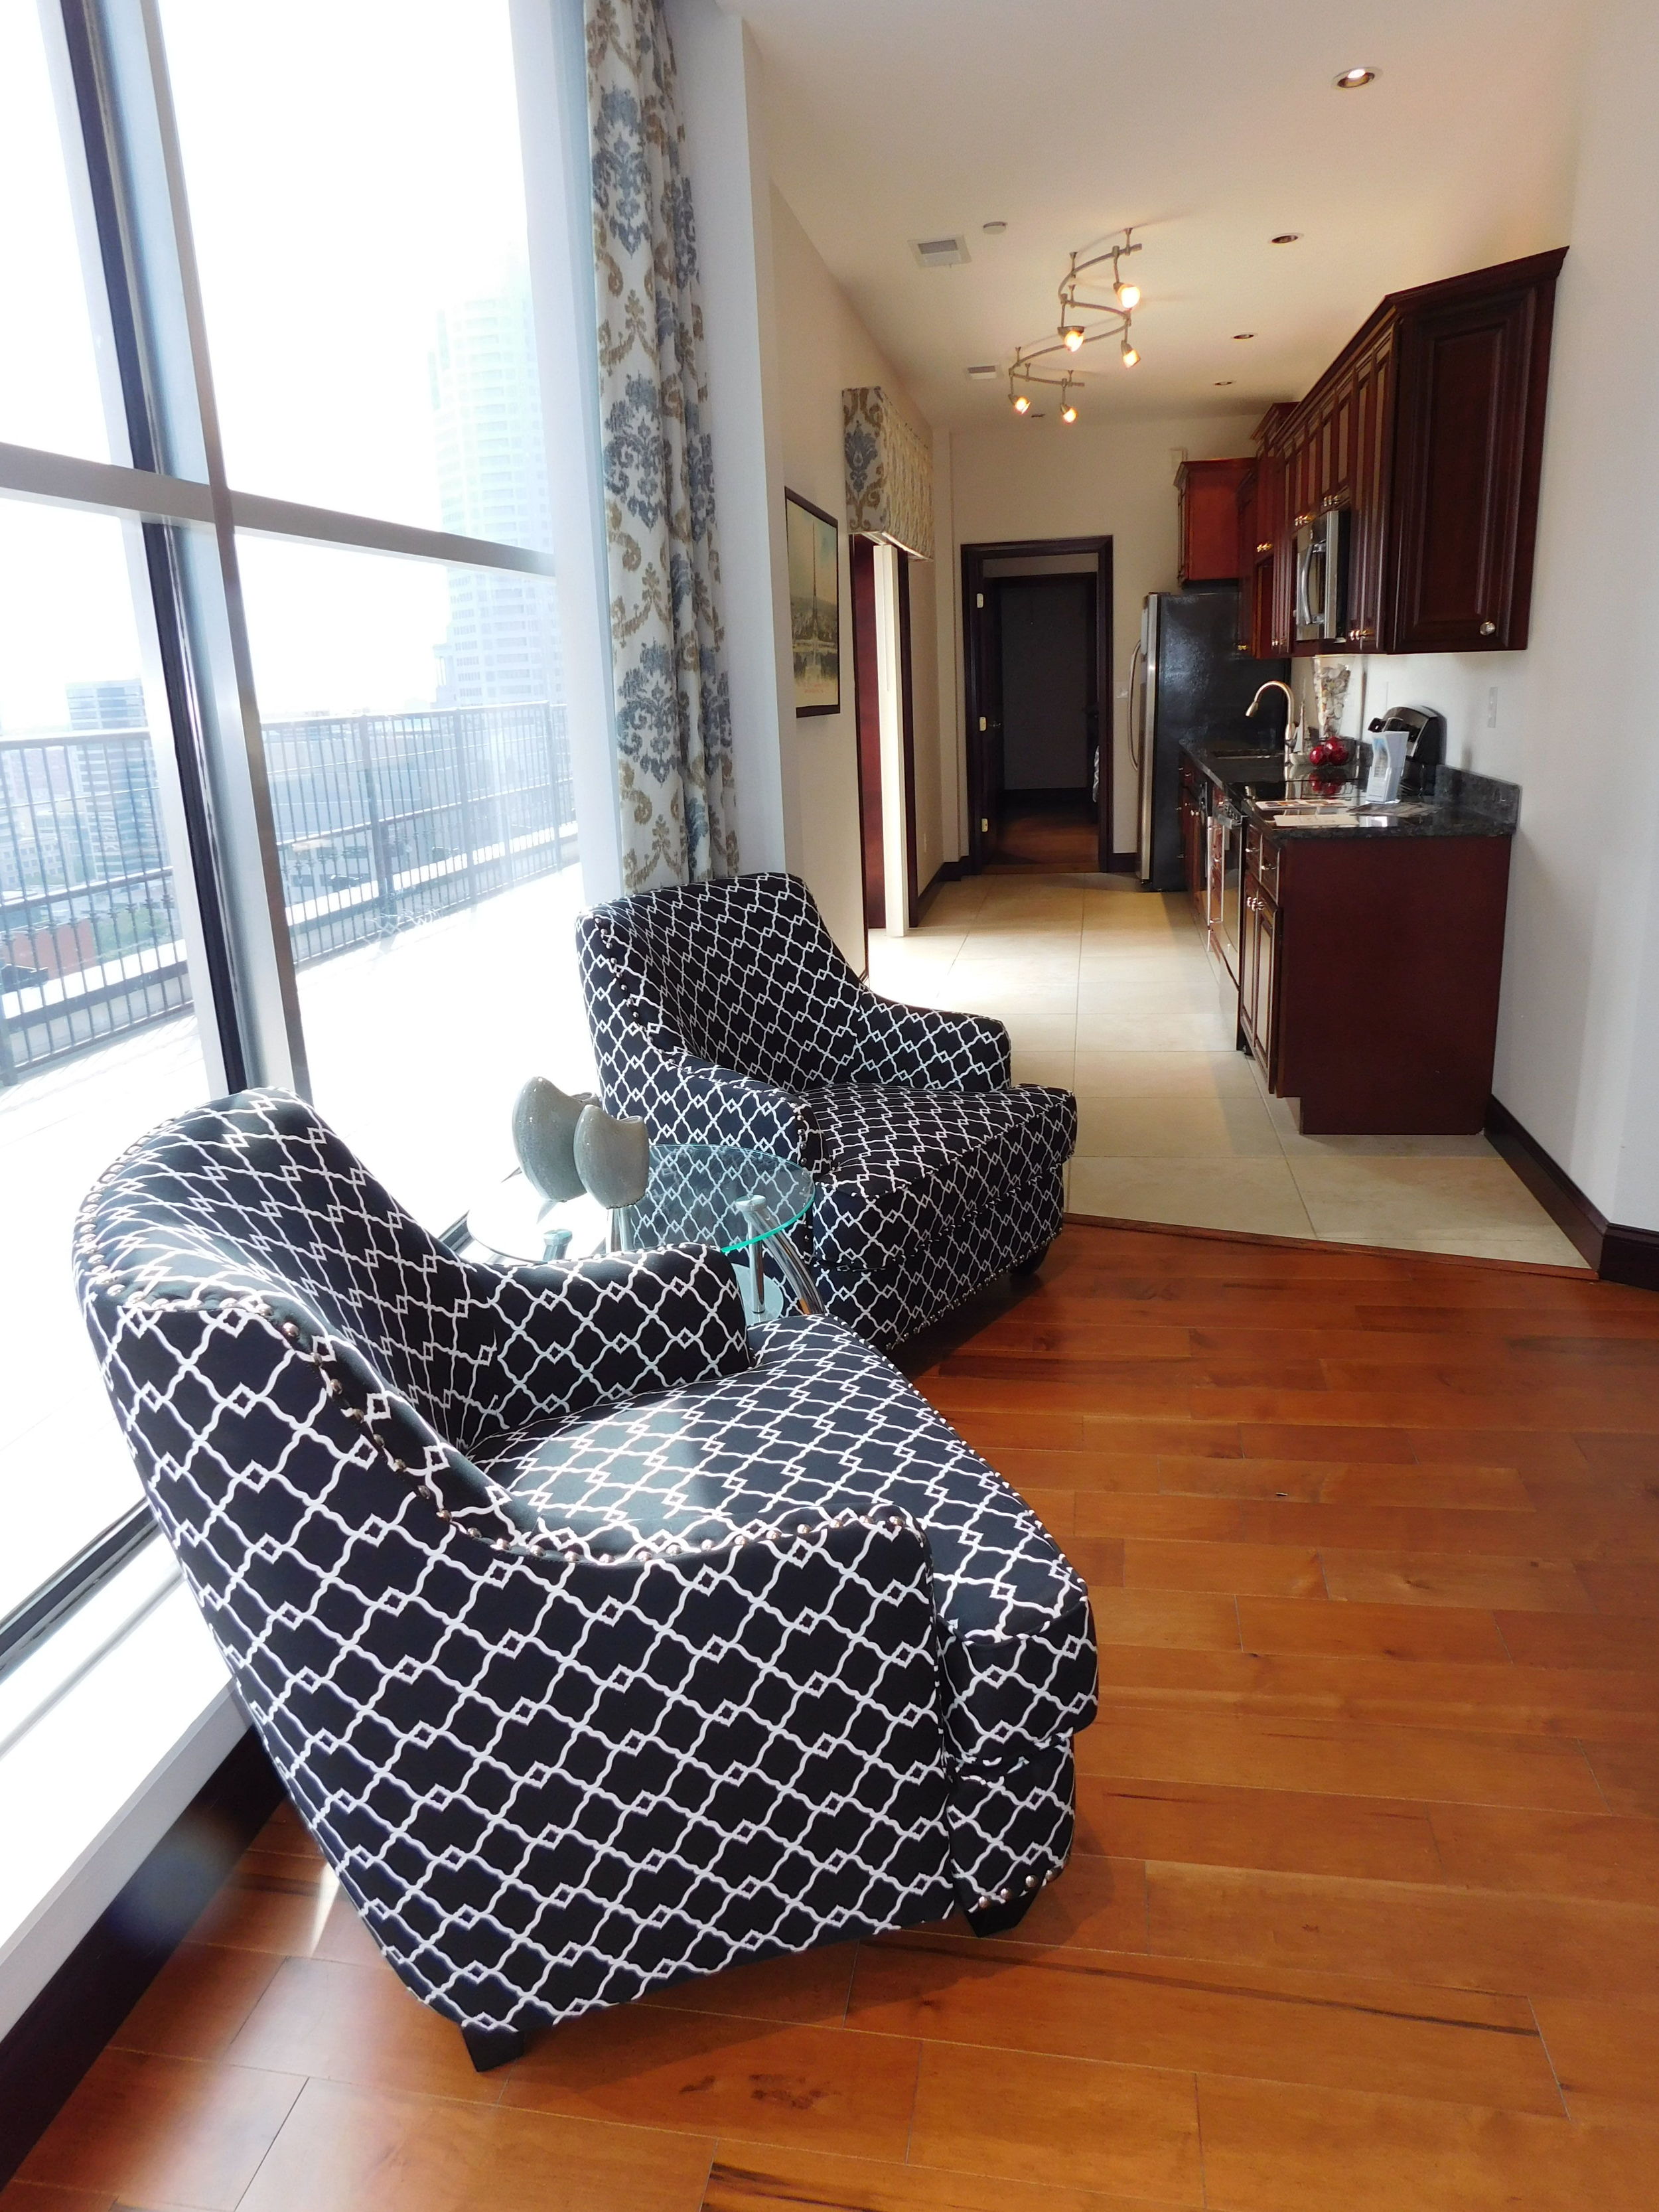 Gallery 515 Downtown St. Louis apartments for rent